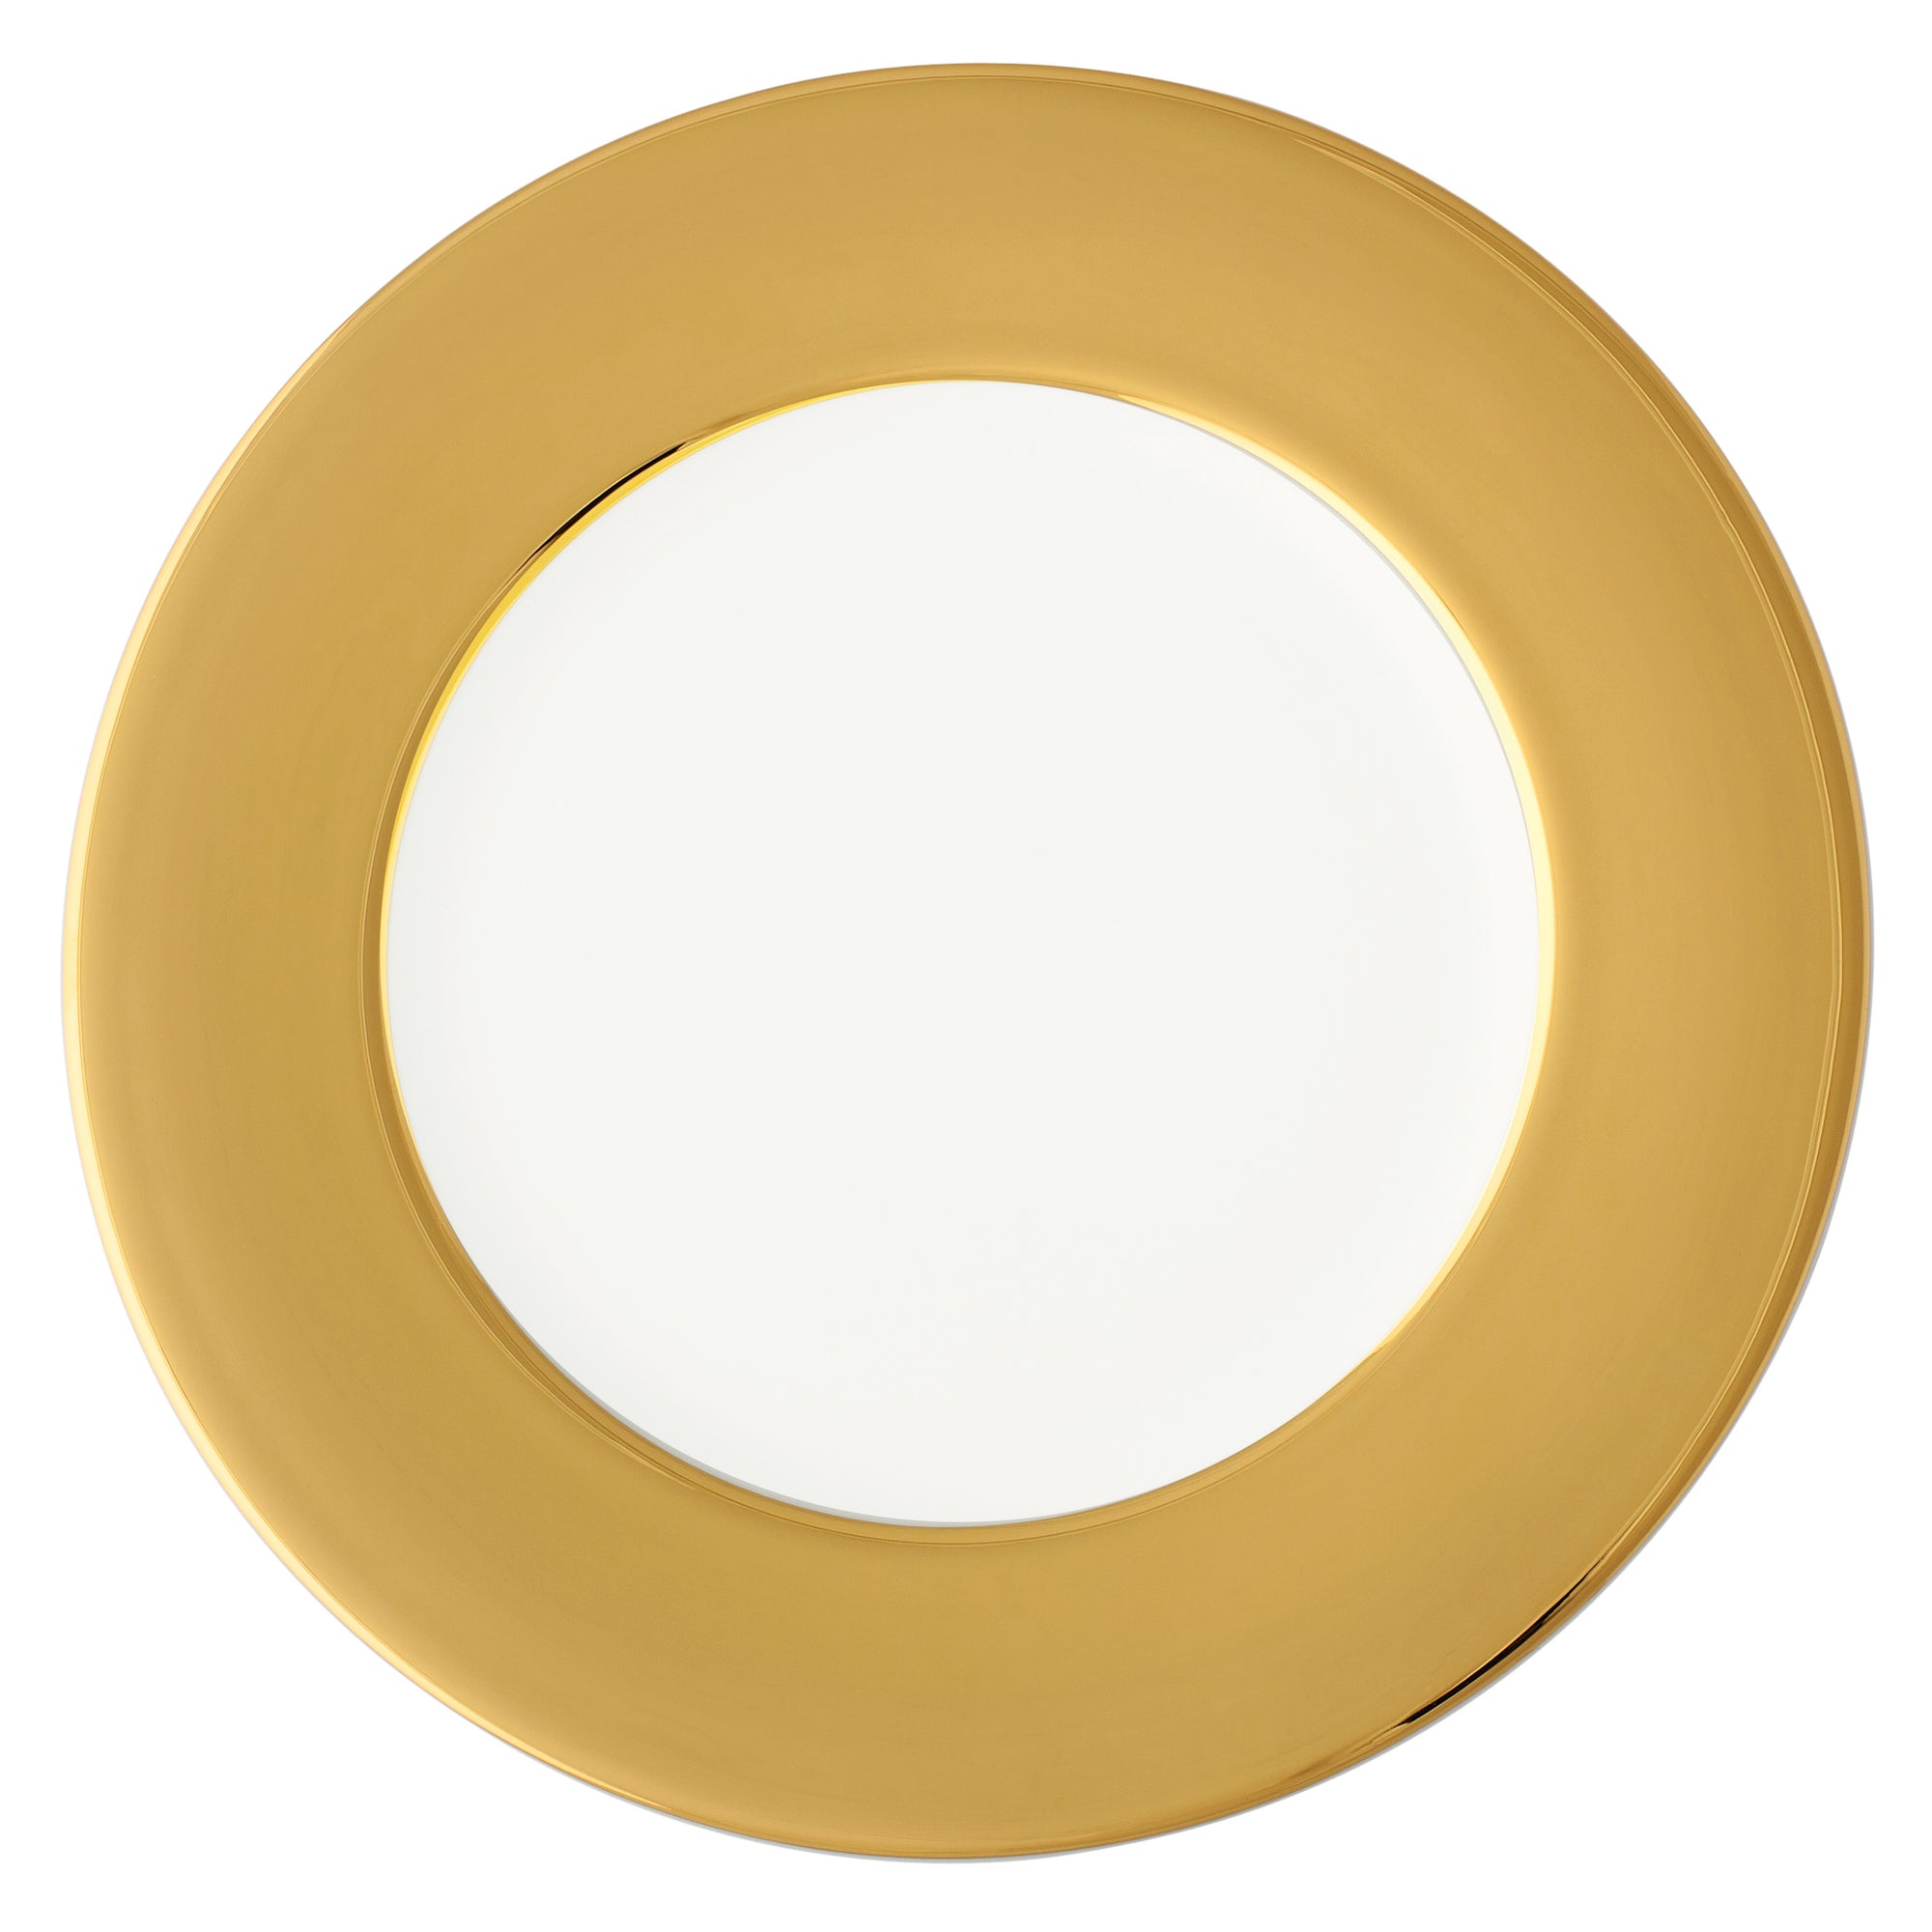 Prouna Diana Gold Charger Plate / Round Platter White Background Photo